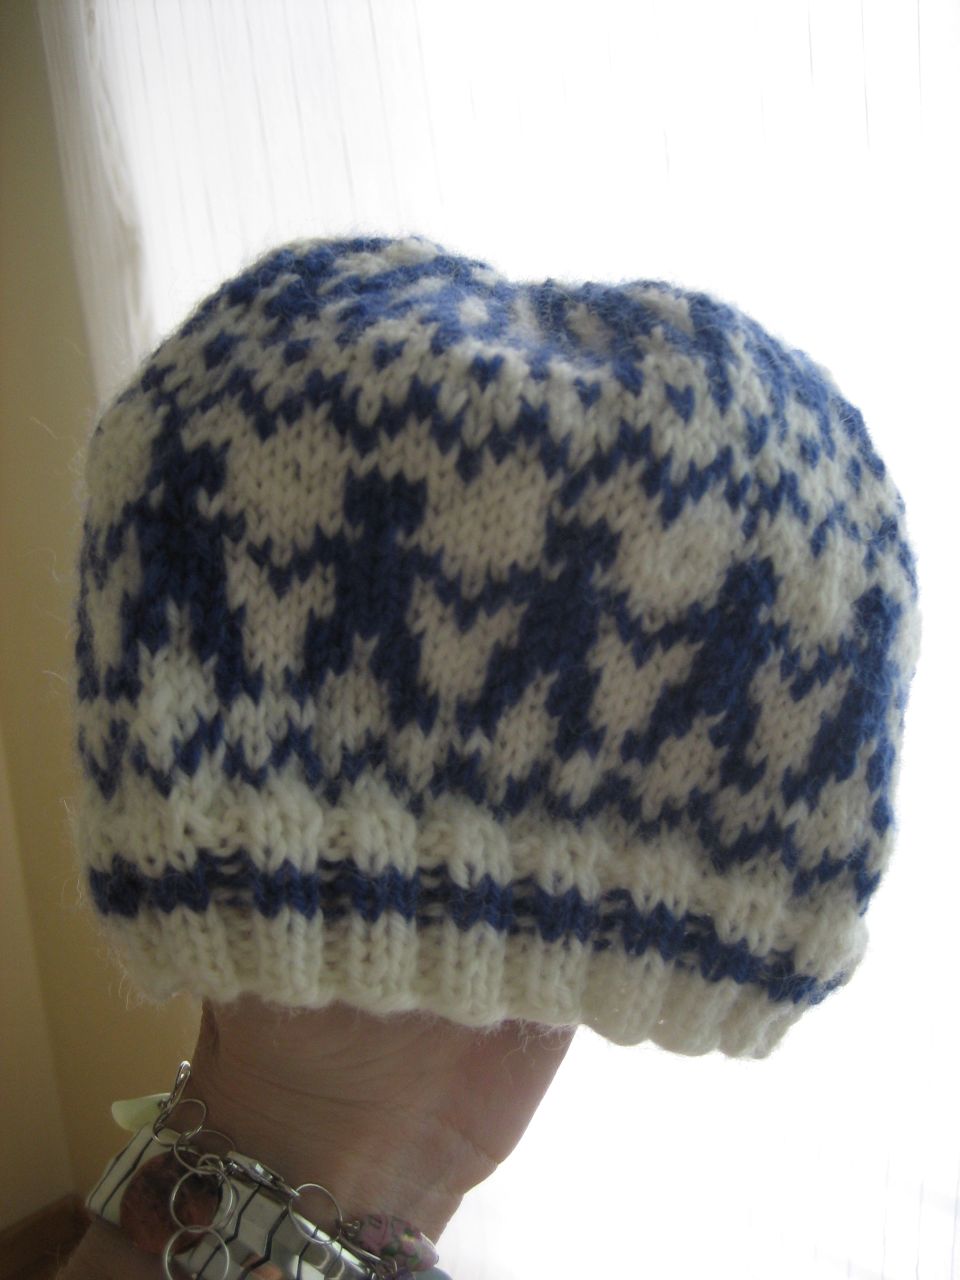 Jan's hat: my first color project